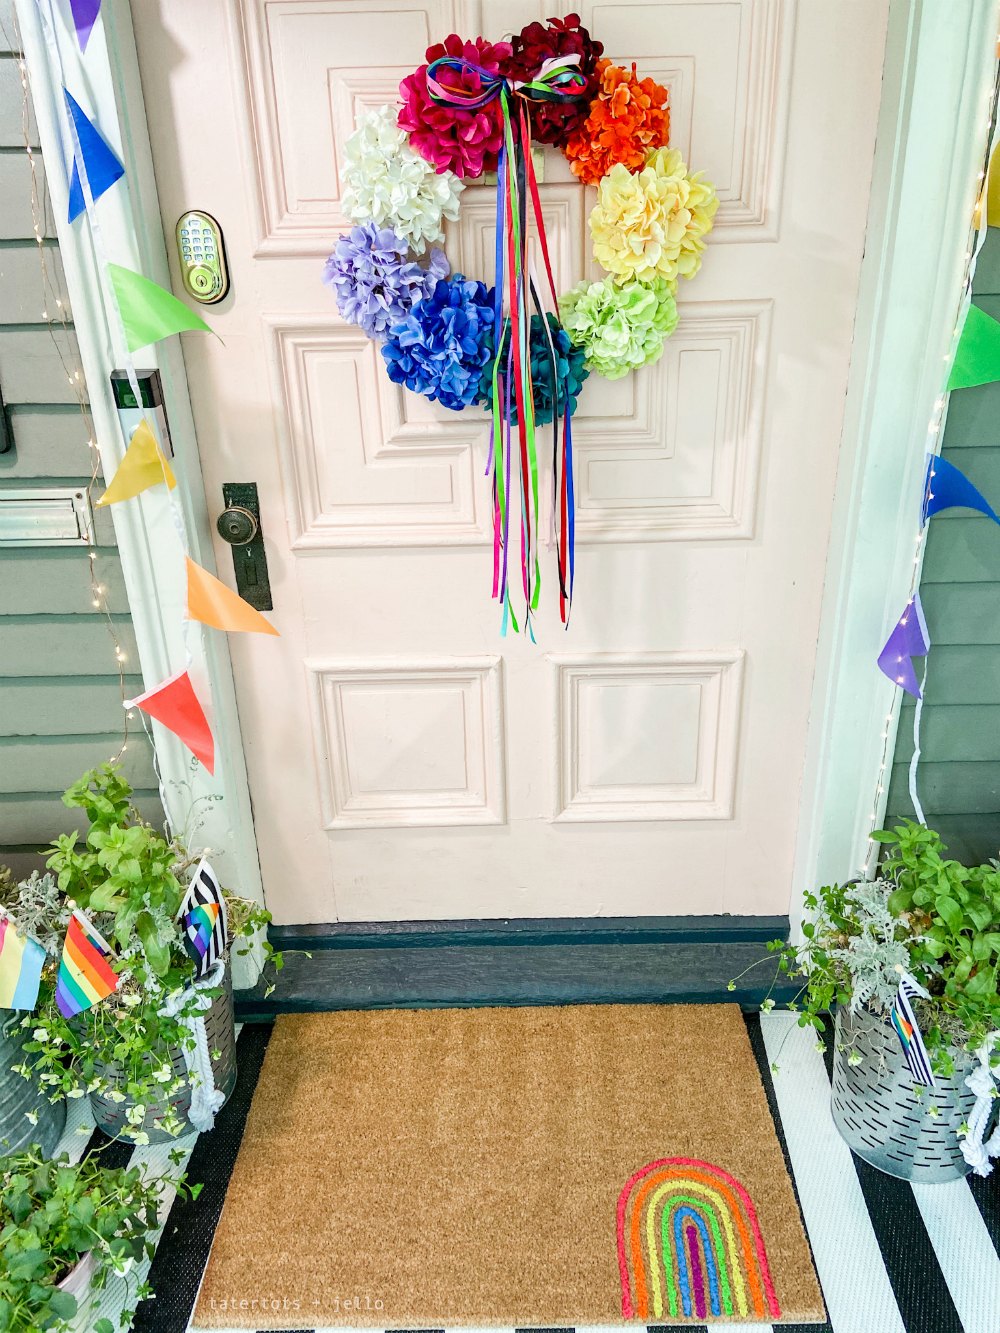 Rainbow Pride Hydrangea Wreath. Celebrate Pride Month and Summer with a colorful and happy rainbow flower wreath! 